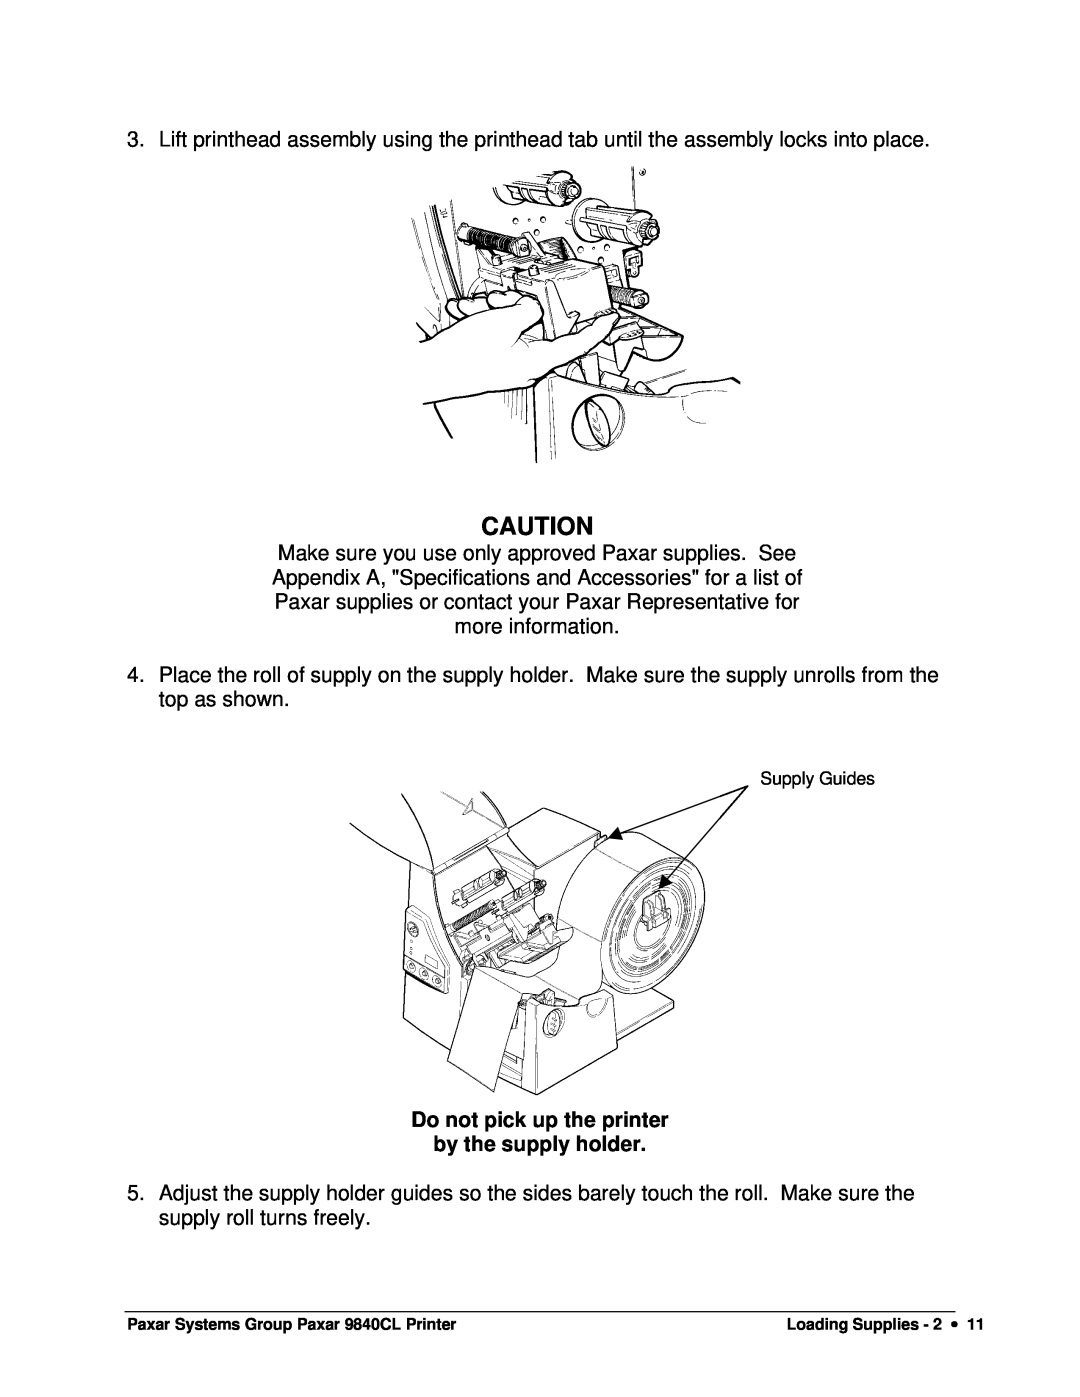 Paxar 9840CL user manual Do not pick up the printer by the supply holder, Supply Guides 